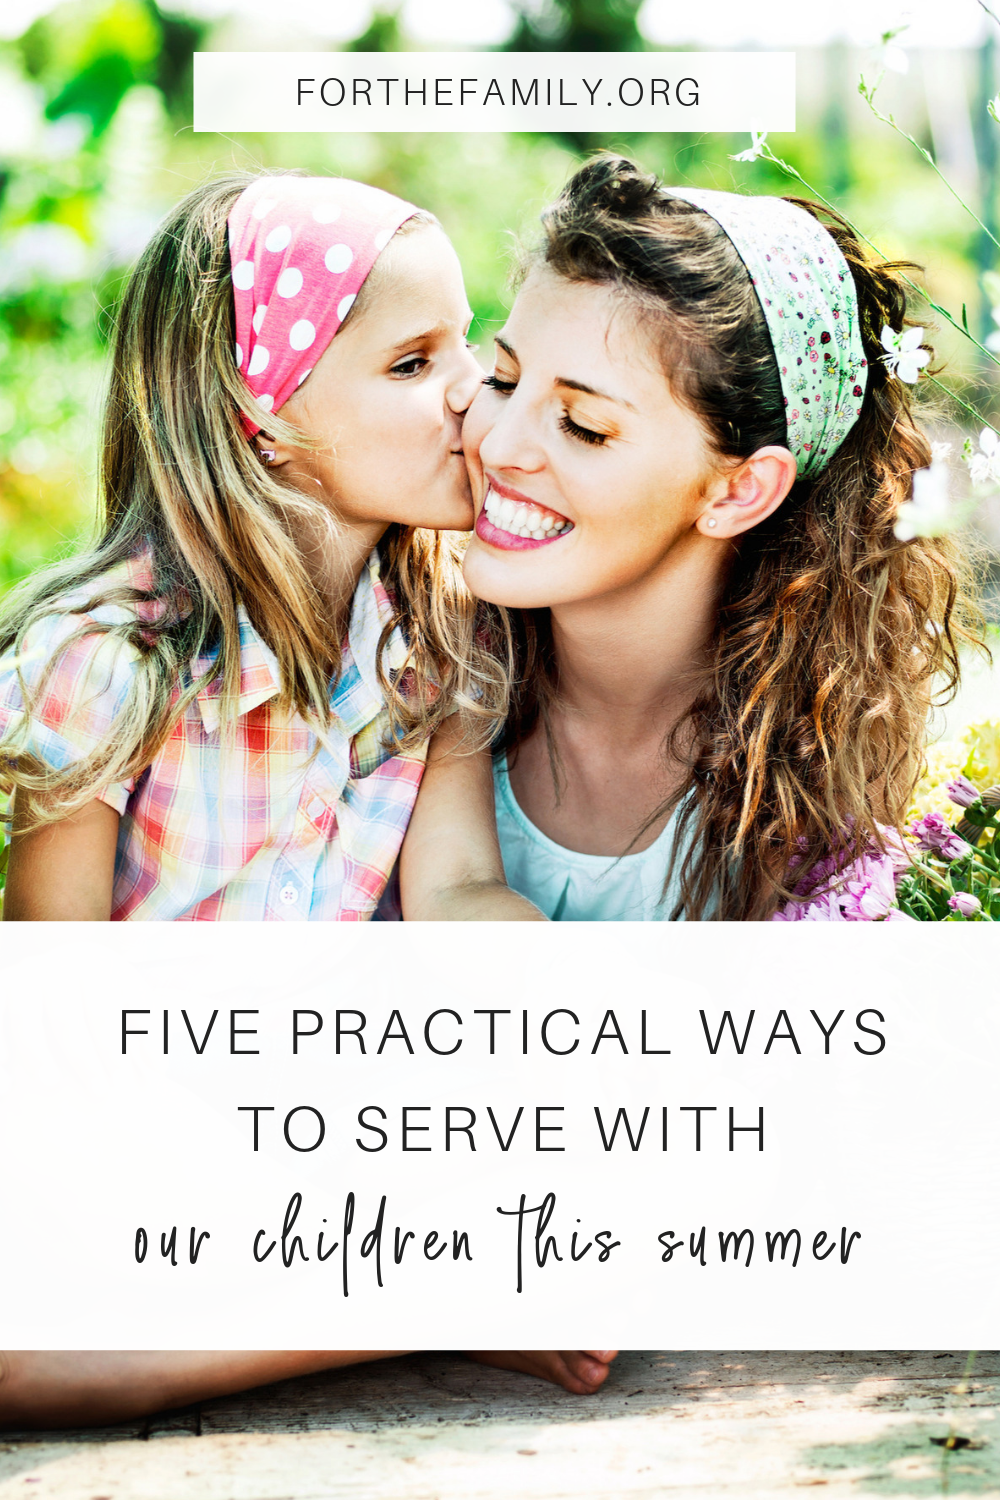 Five Practical Ways to Serve with Our Children This Summer